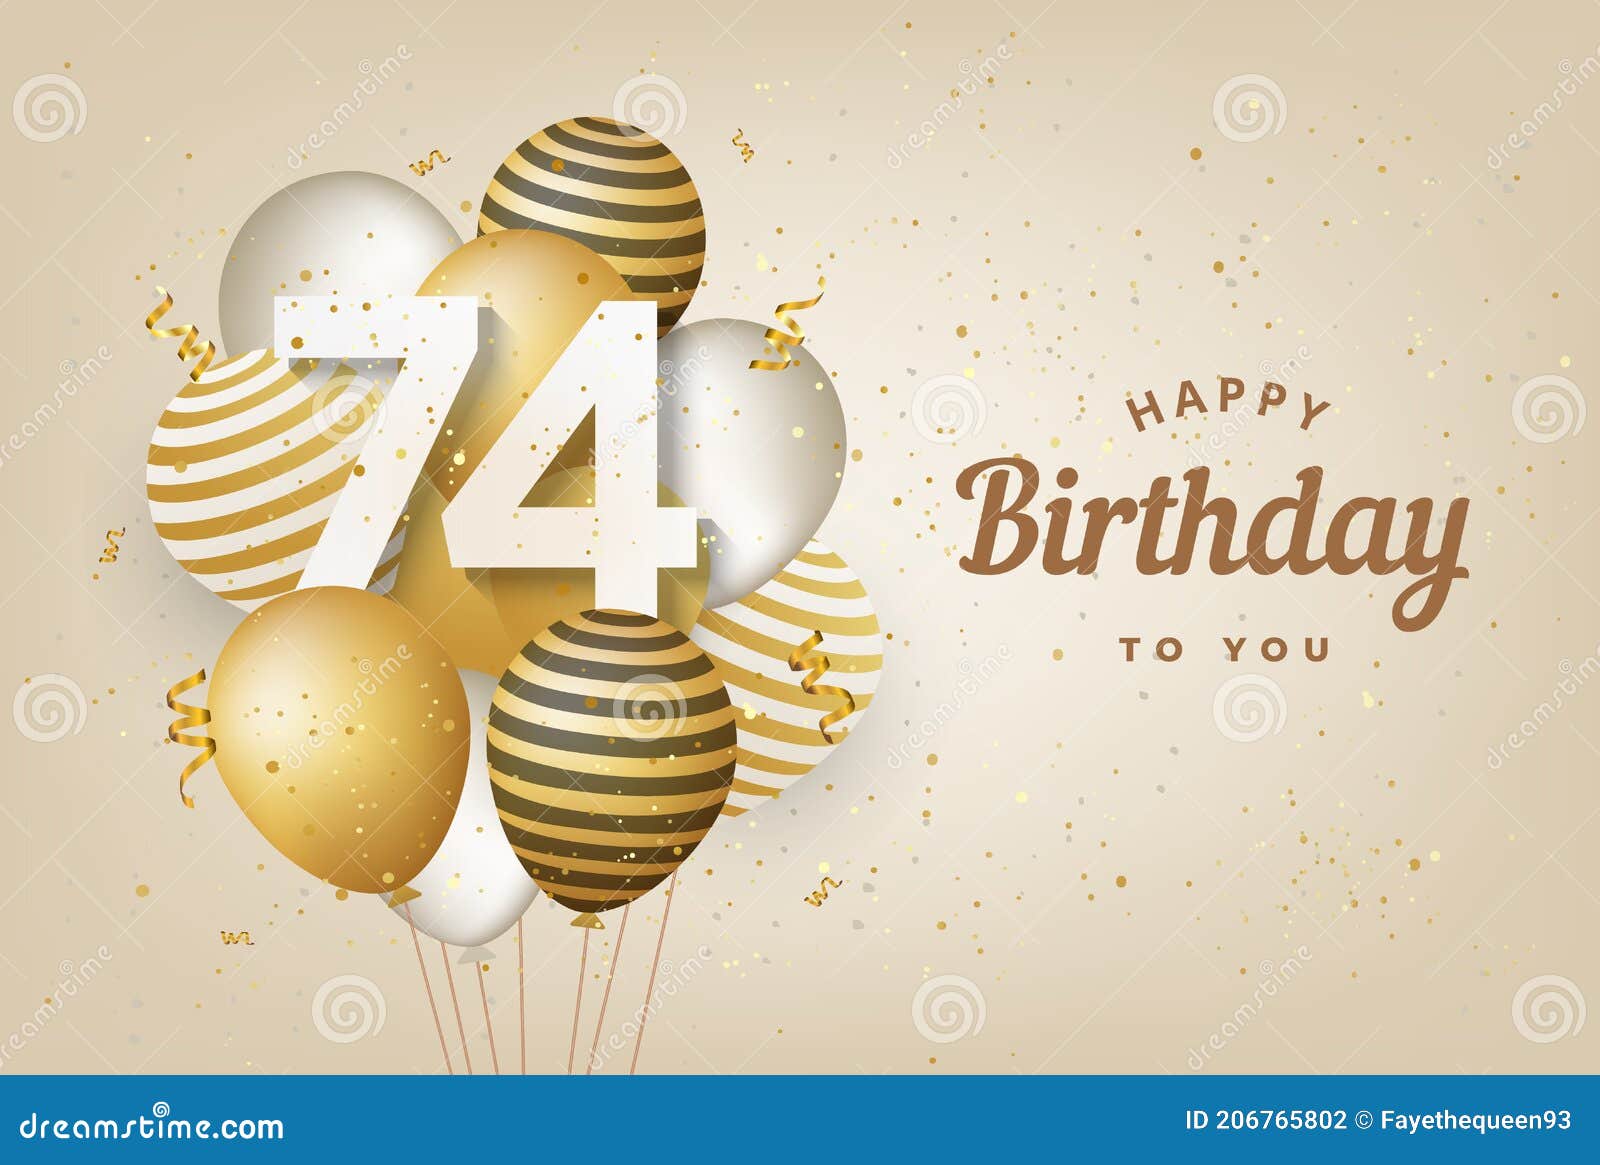 Happy 74th Birthday With Gold Balloons Greeting Card Background Stock